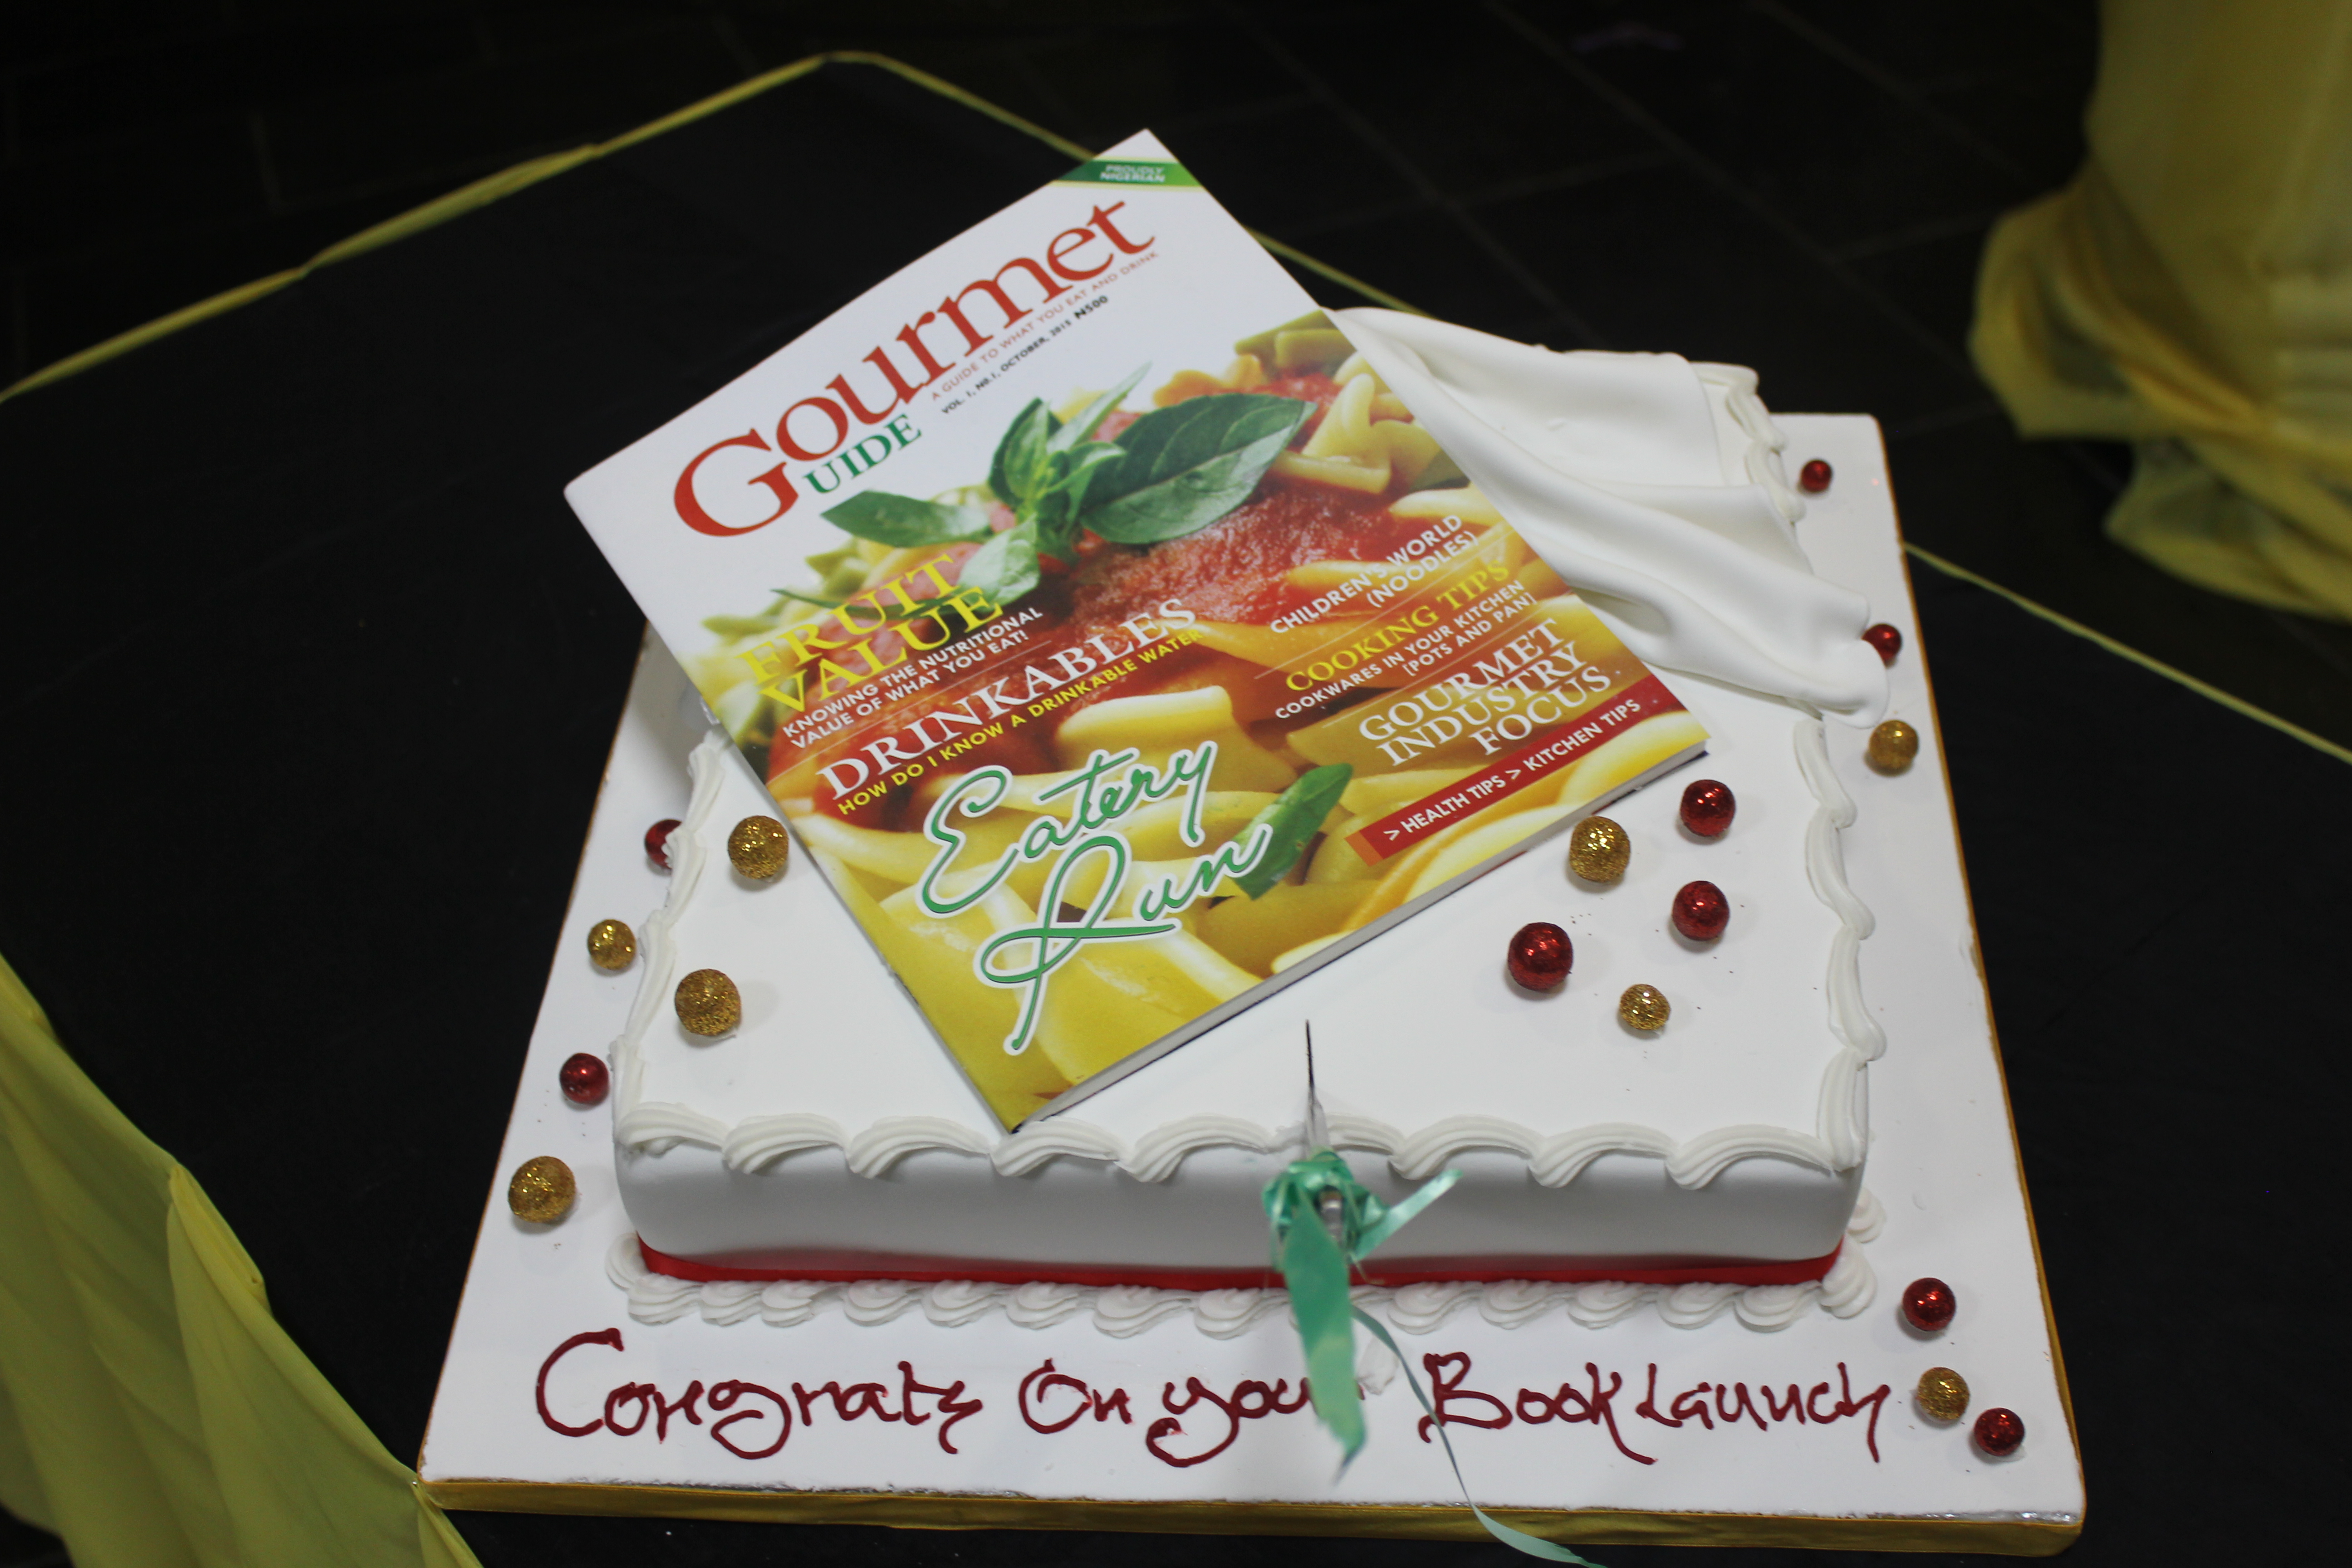 the gourmet guide cake by Kema Abuede